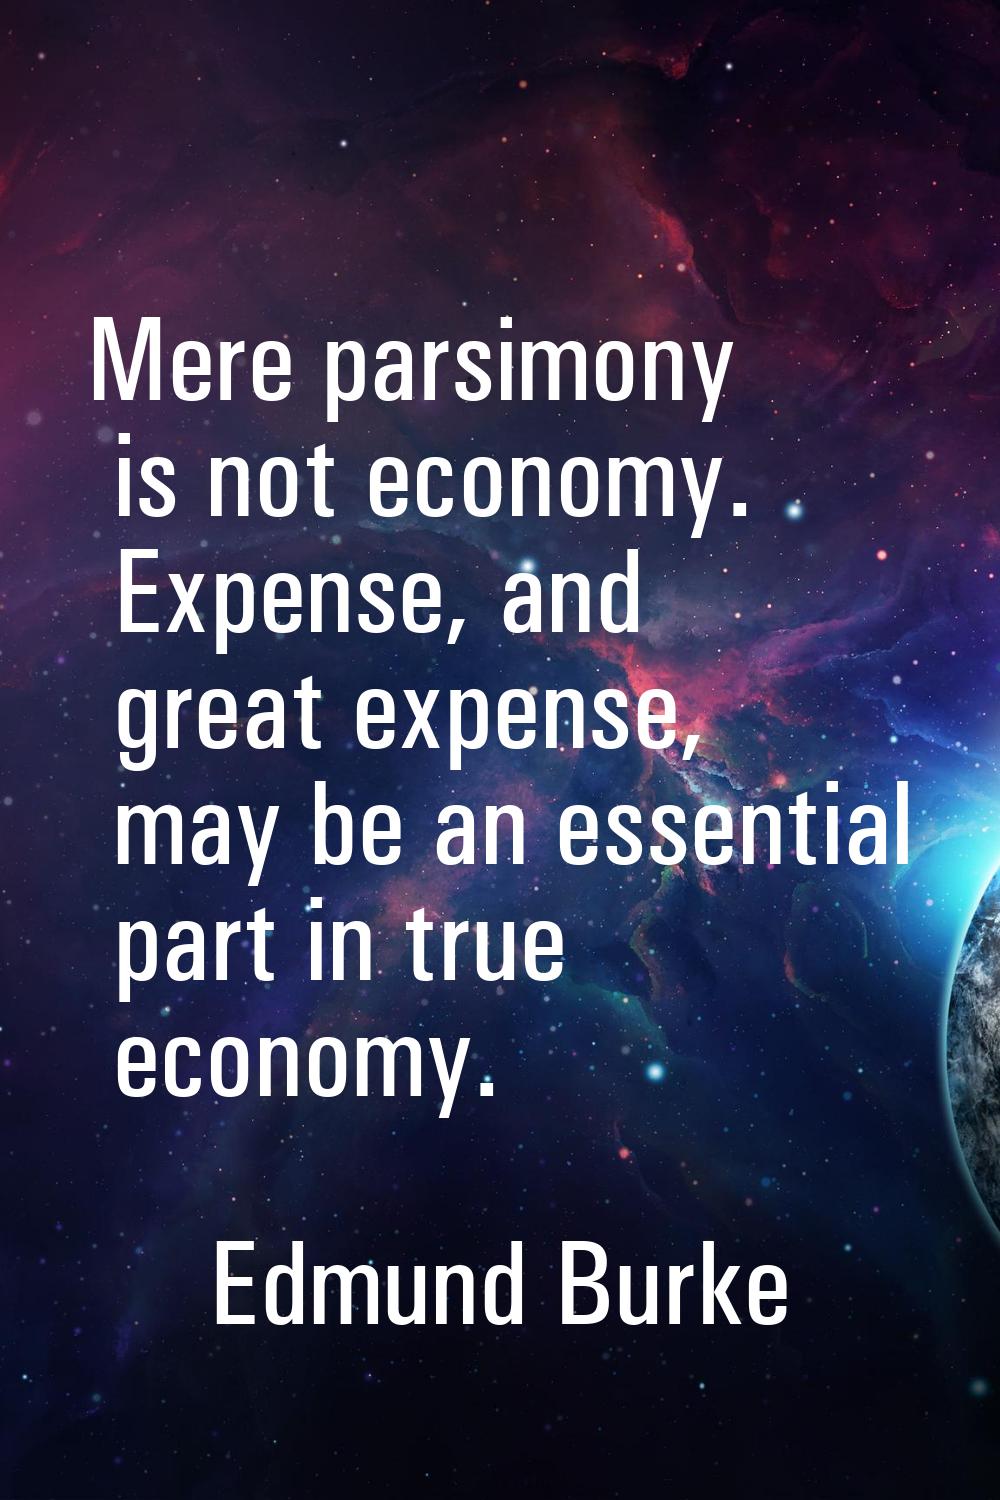 Mere parsimony is not economy. Expense, and great expense, may be an essential part in true economy